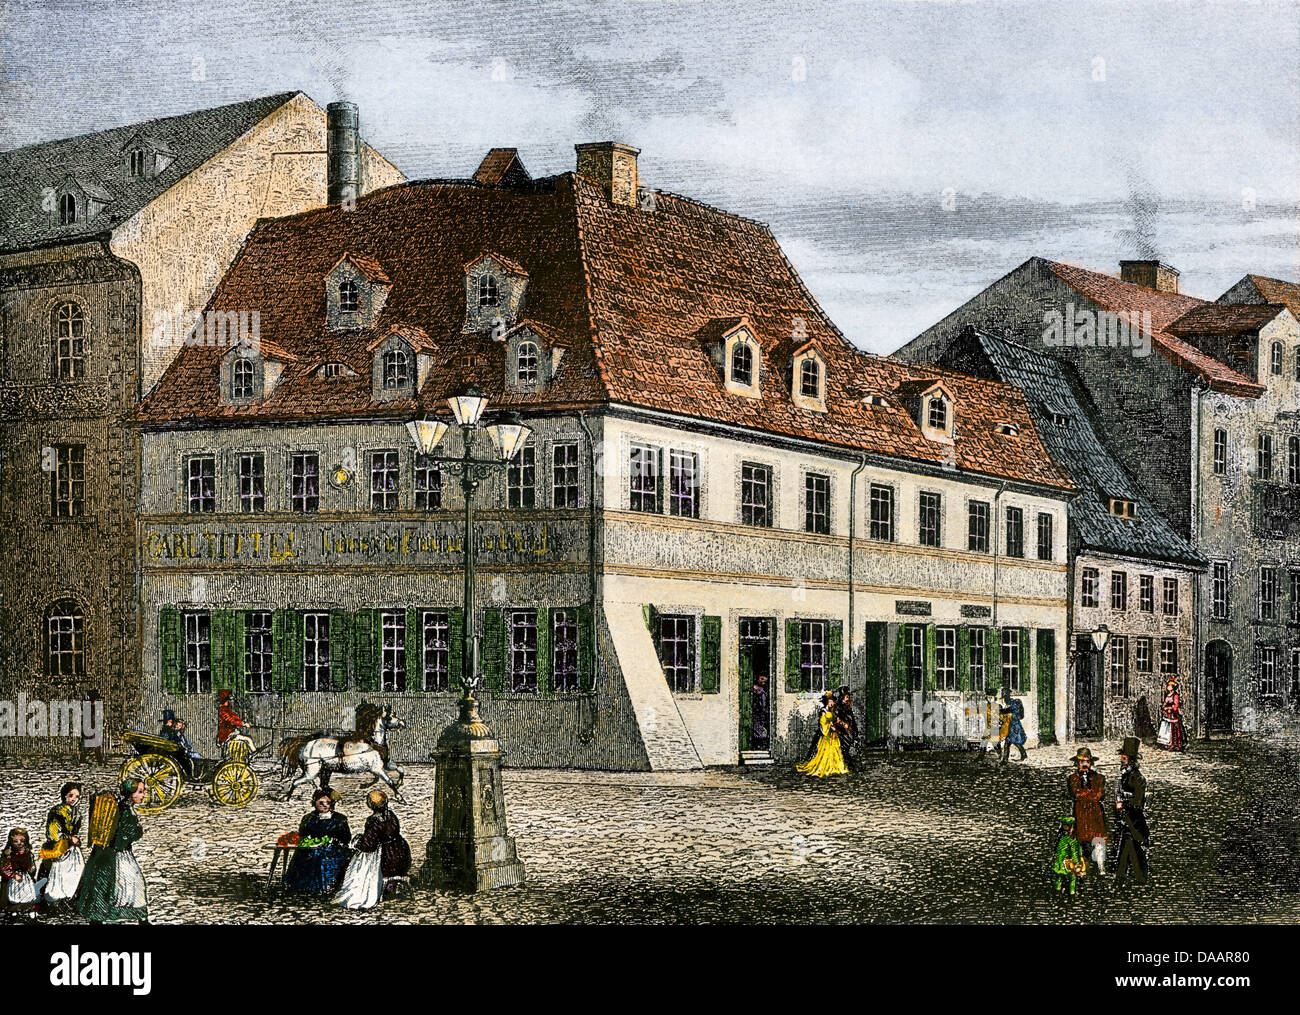 Birthplace of Robert Schumann in Zwickau, Germany. Hand-colored halftone of an illustration Stock Photo